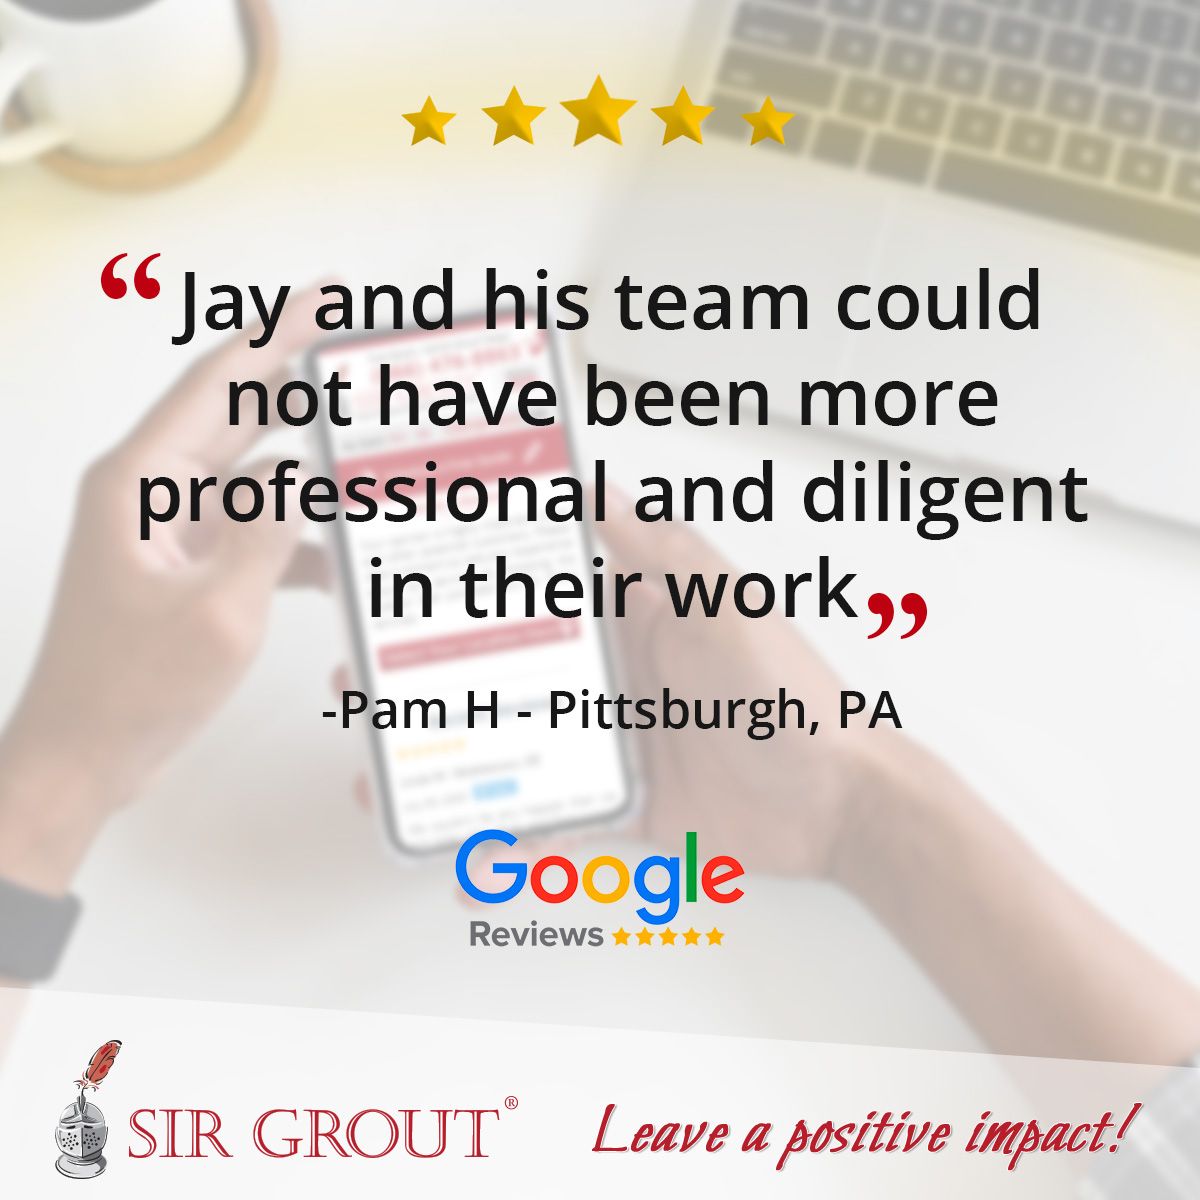 Jay and his team could not have been more professional and diligent in their work